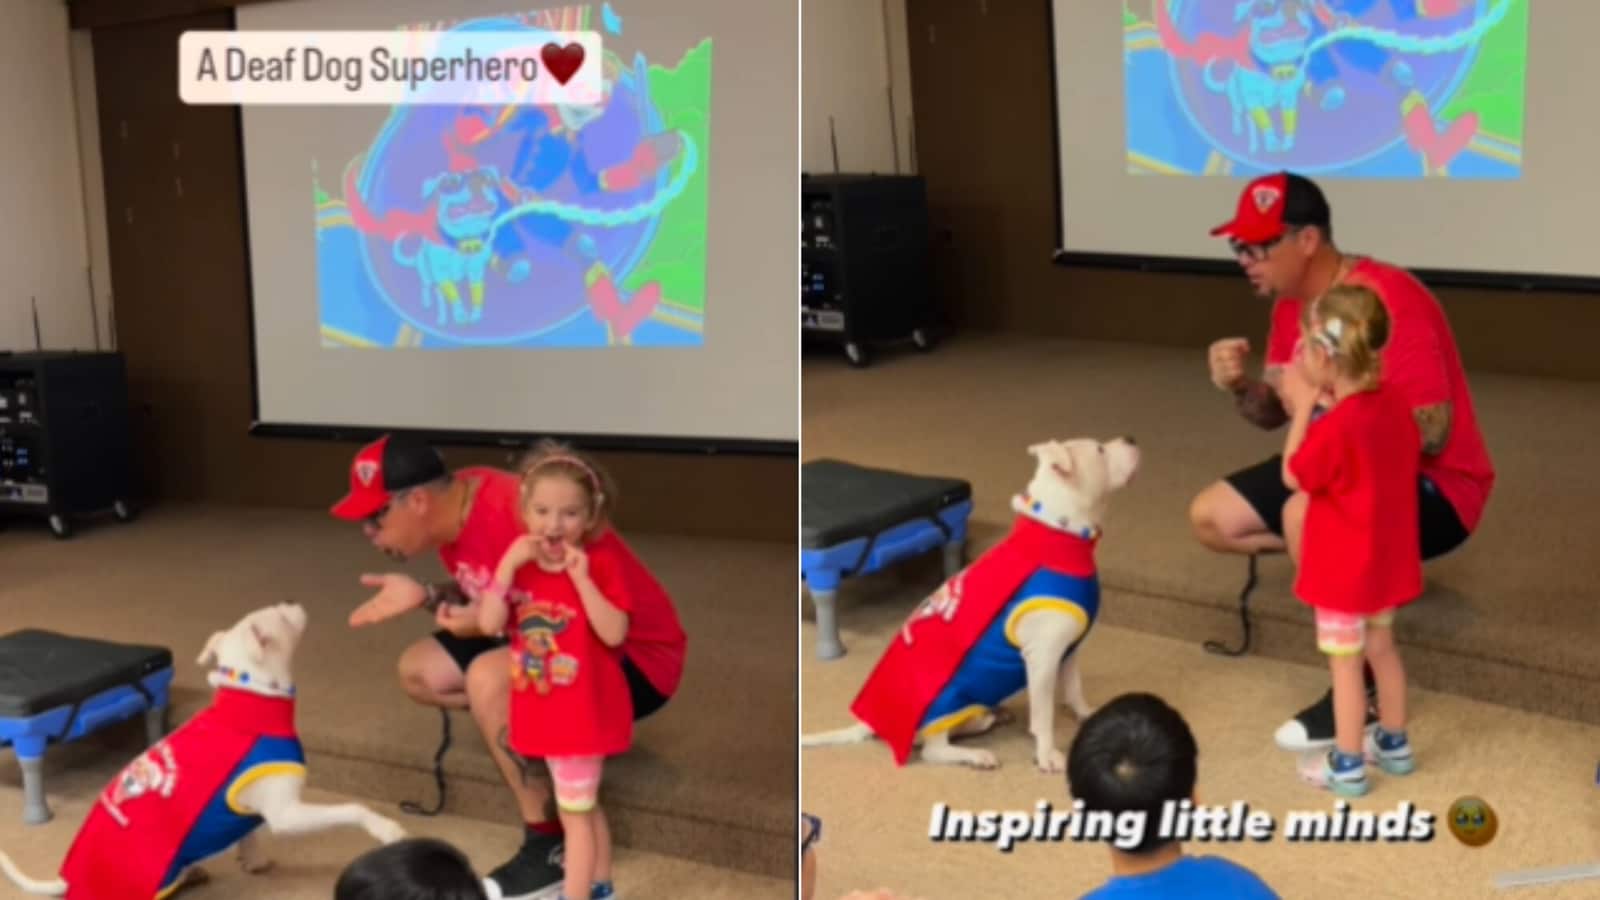 Man uses sign language to communicate with deaf dog. Watch